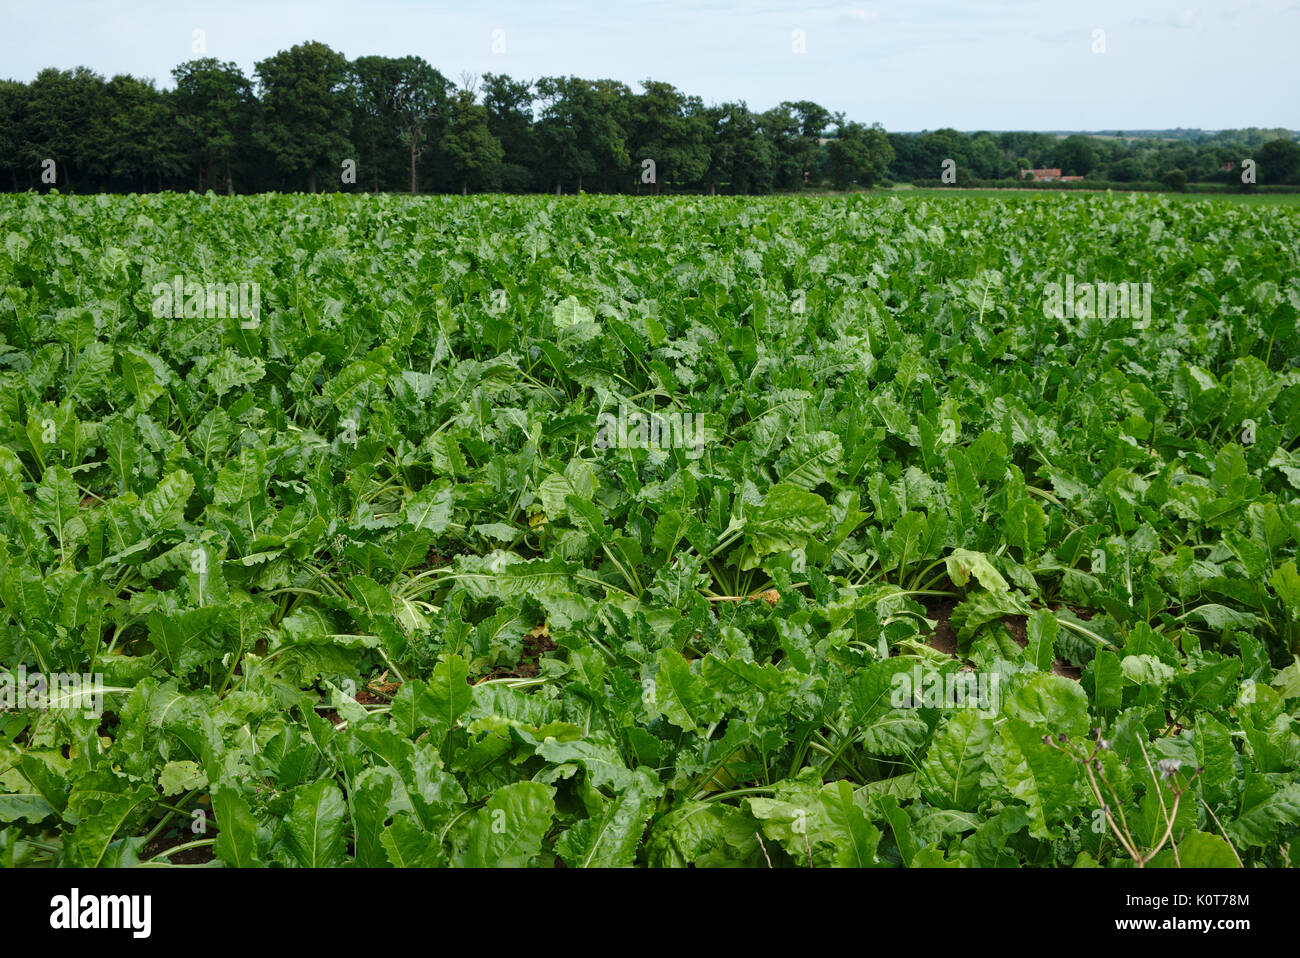 Field of salad crops ready for picking Stock Photo